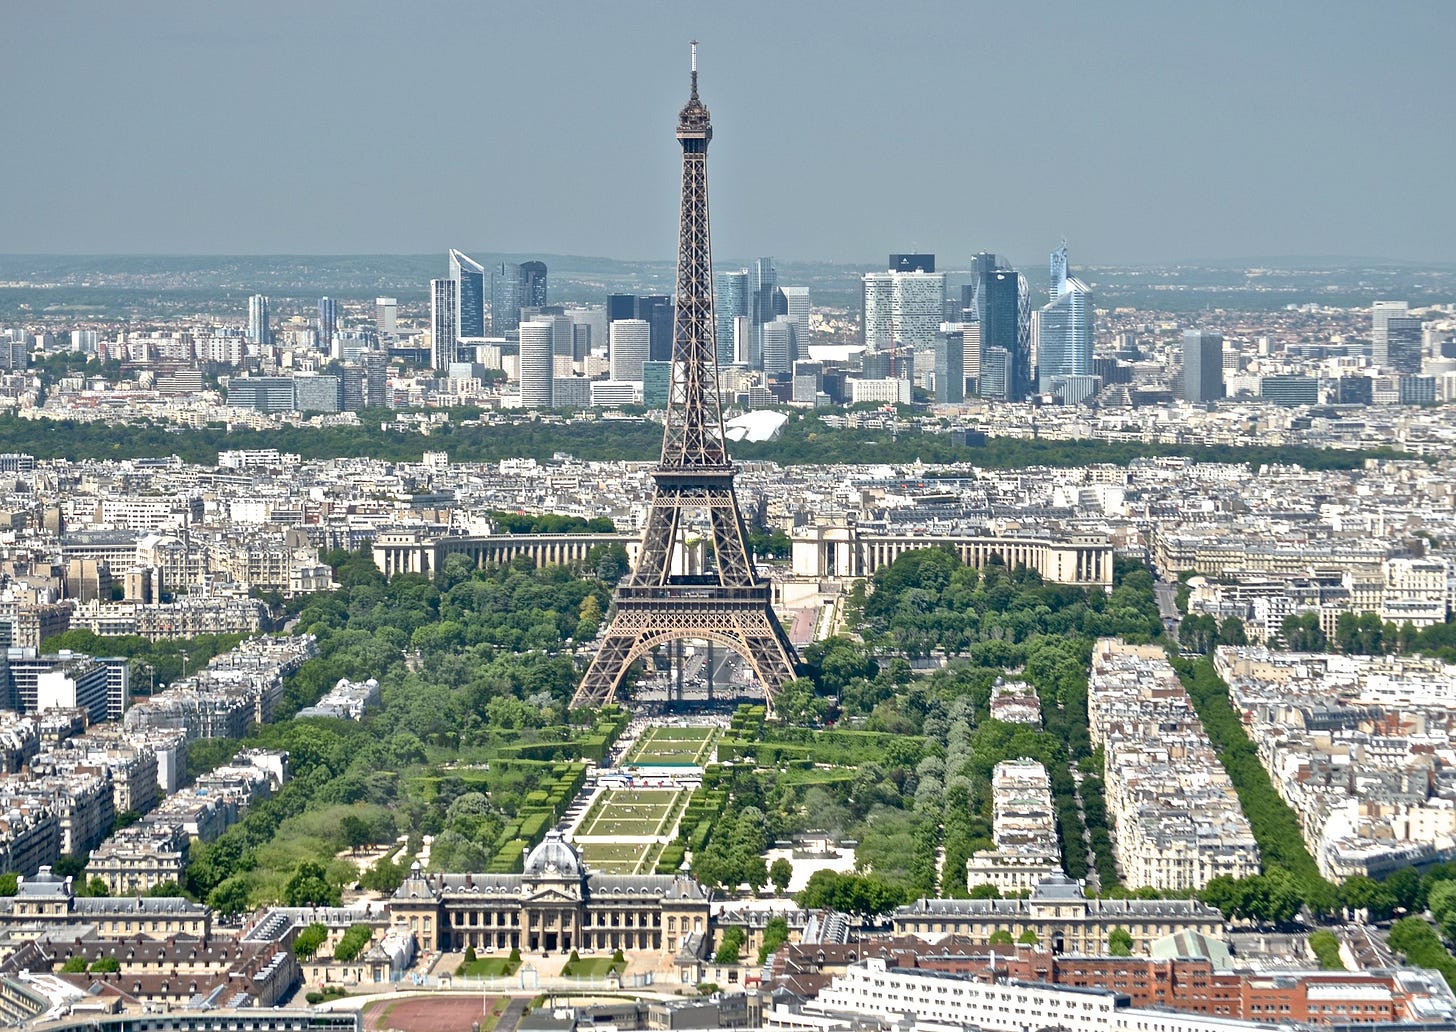 Eiffel Tower from the Tour Montparnasse 3, Paris May 2014.jpg